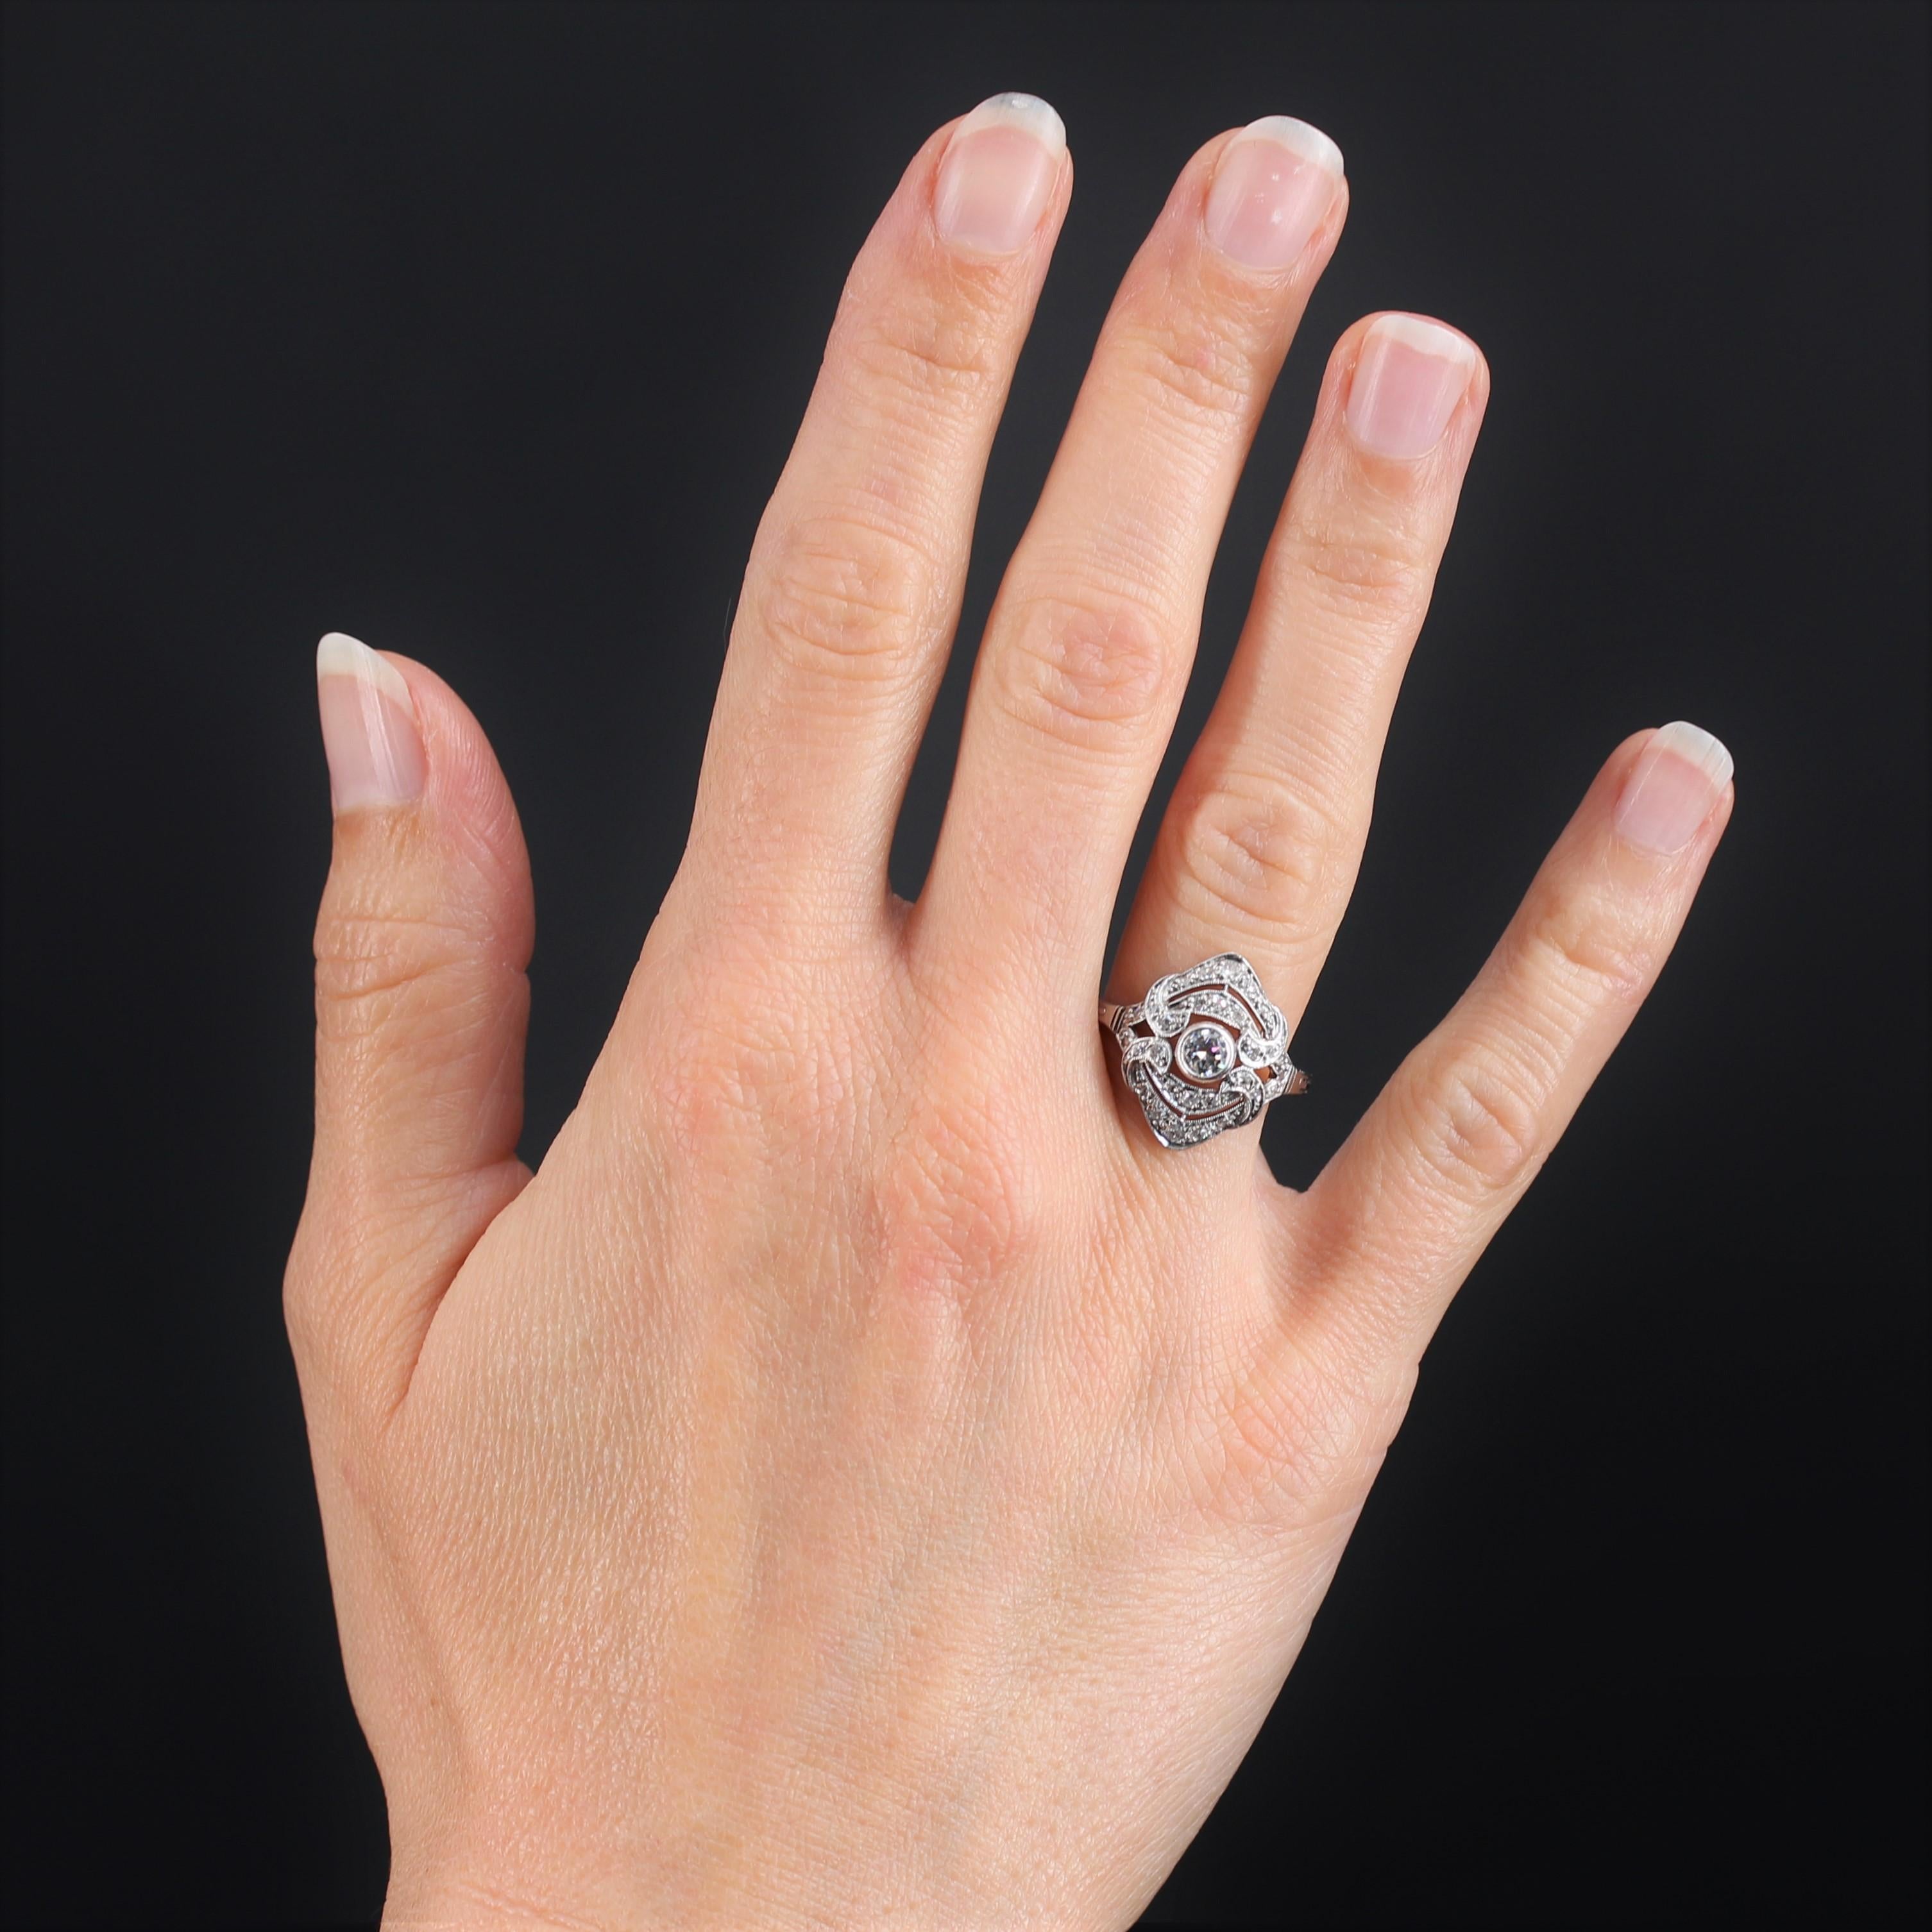 Ring in 18 karat white gold, eagle head hallmark and platinum, dog head hallmark.
Presenting a diamond-shaped setting that follows the curve of the finger, this lovely antique ring is adorned in the center with a brilliant-cut diamond in closed